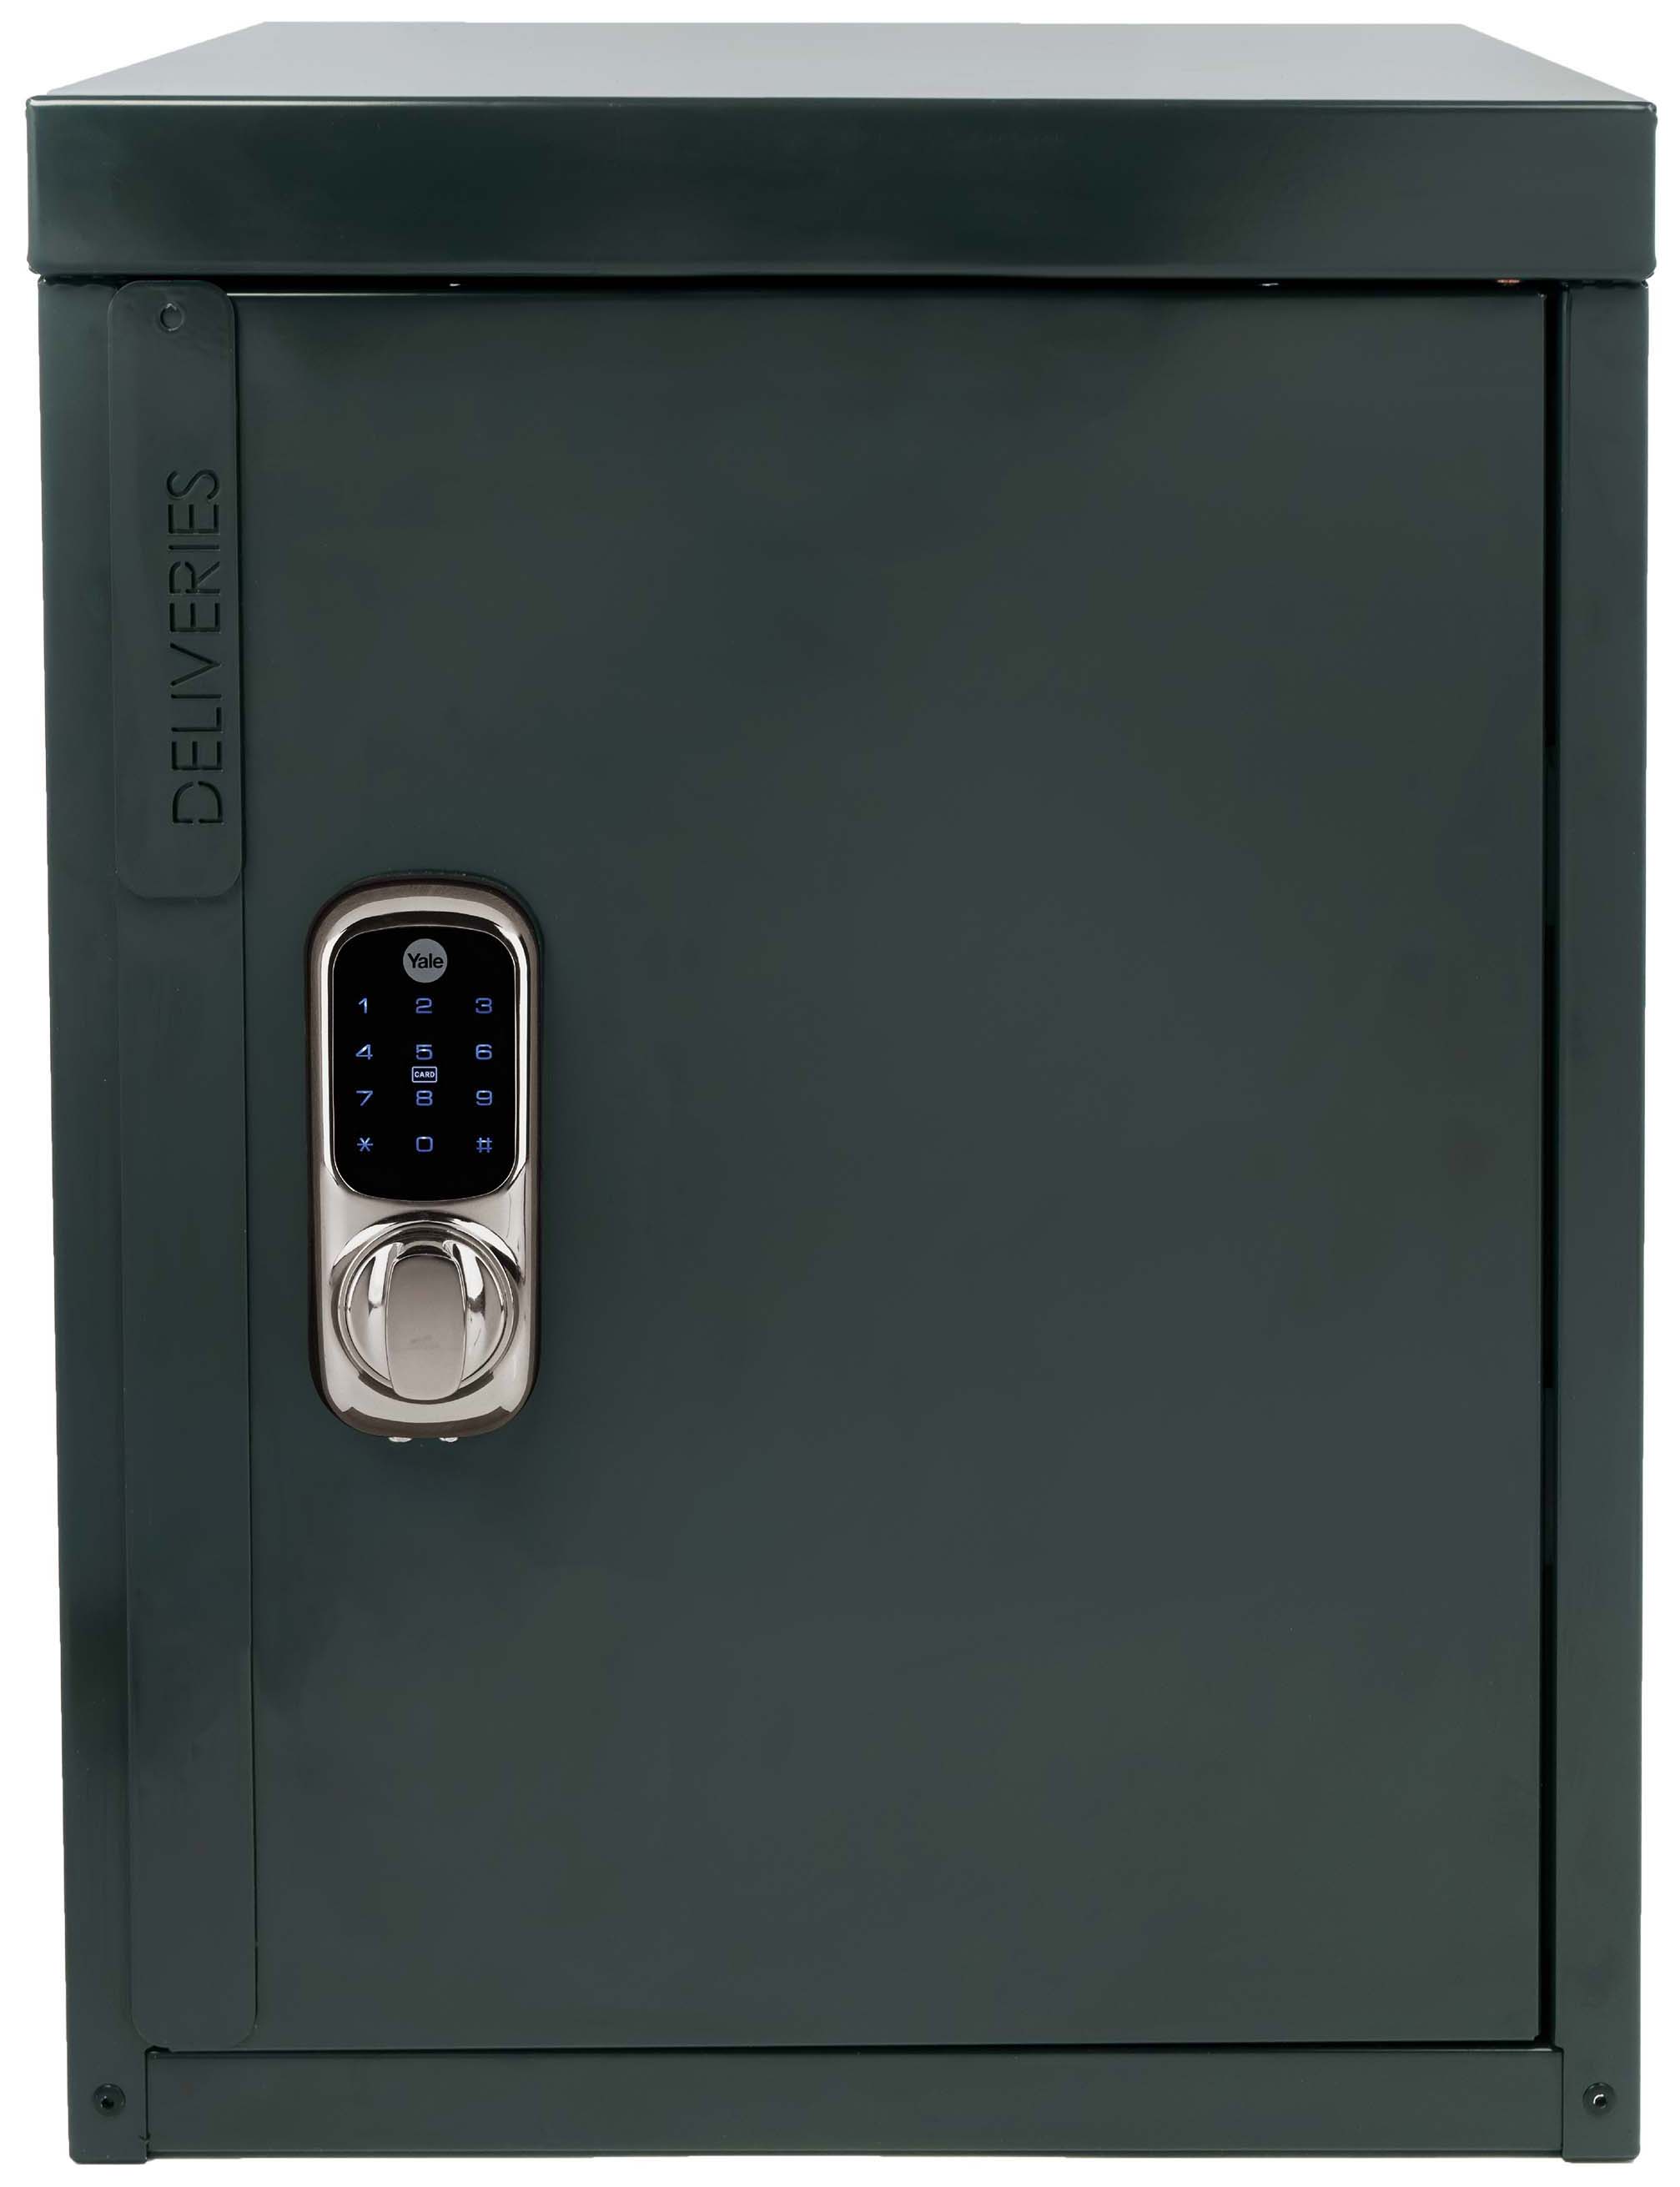 Image of Yale Smart Delivery Box with Chrome Keyless Lock - Anthracite Grey